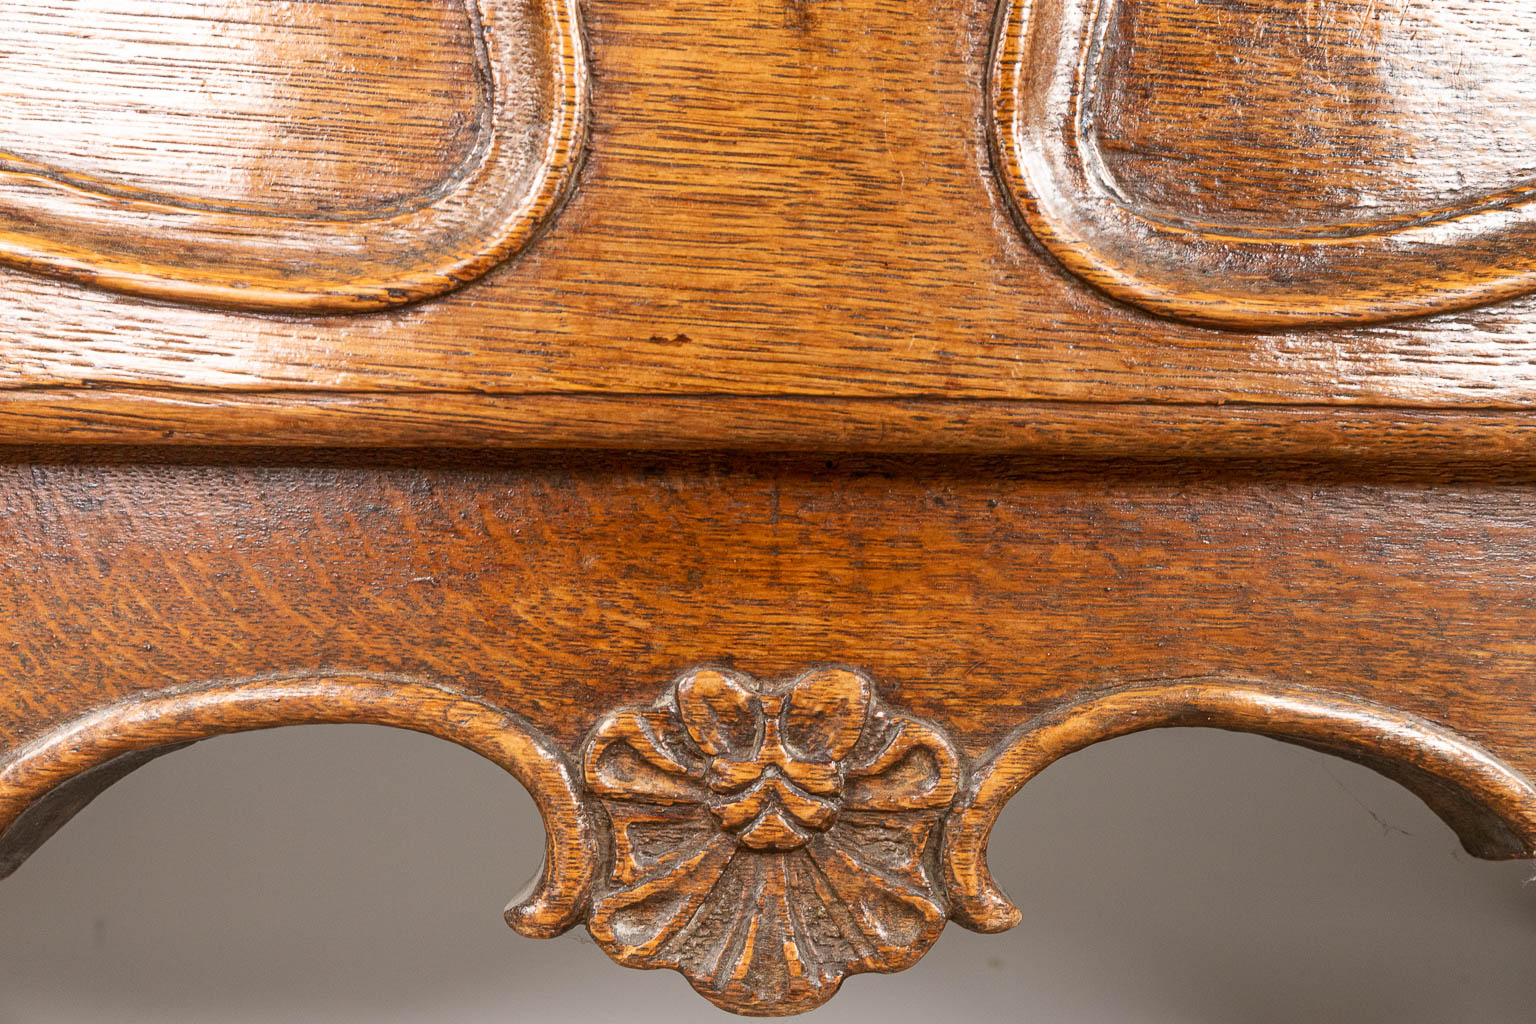 An antique commode with 3 drawers and a secretaire top, made of oak. (H:96cm)